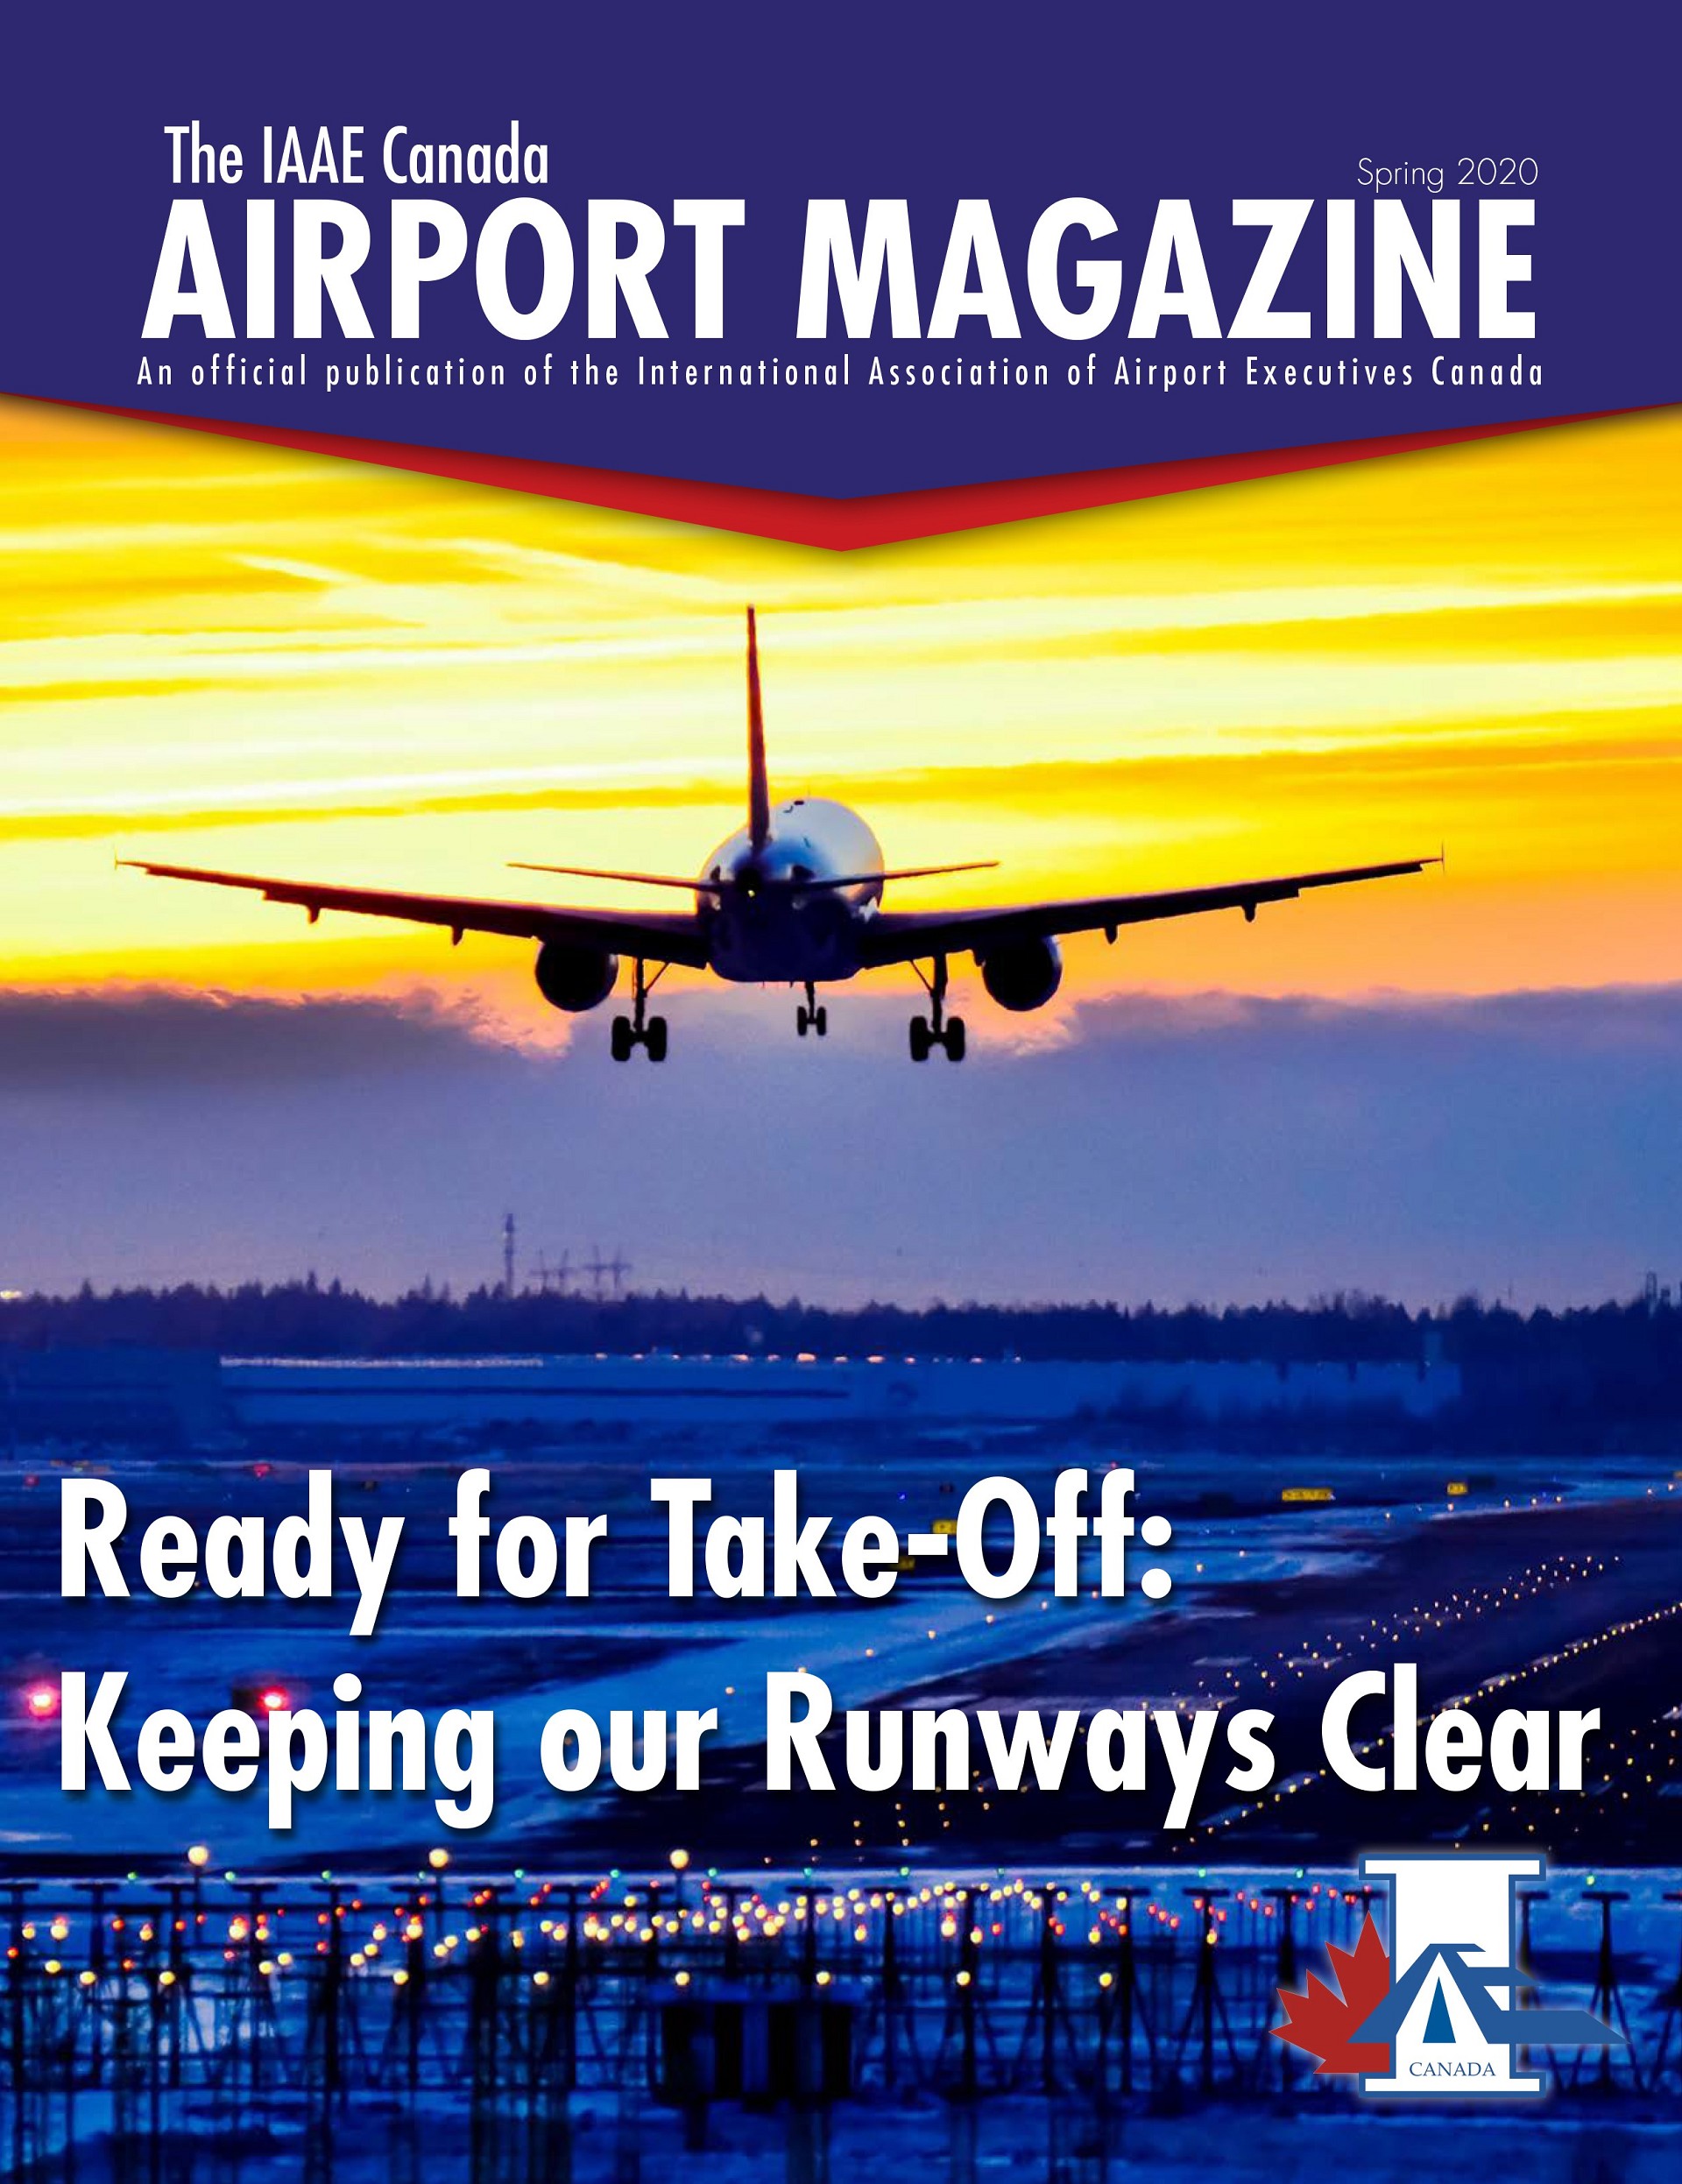 Spring 2020, Ready for Take off: keeping our runways clear